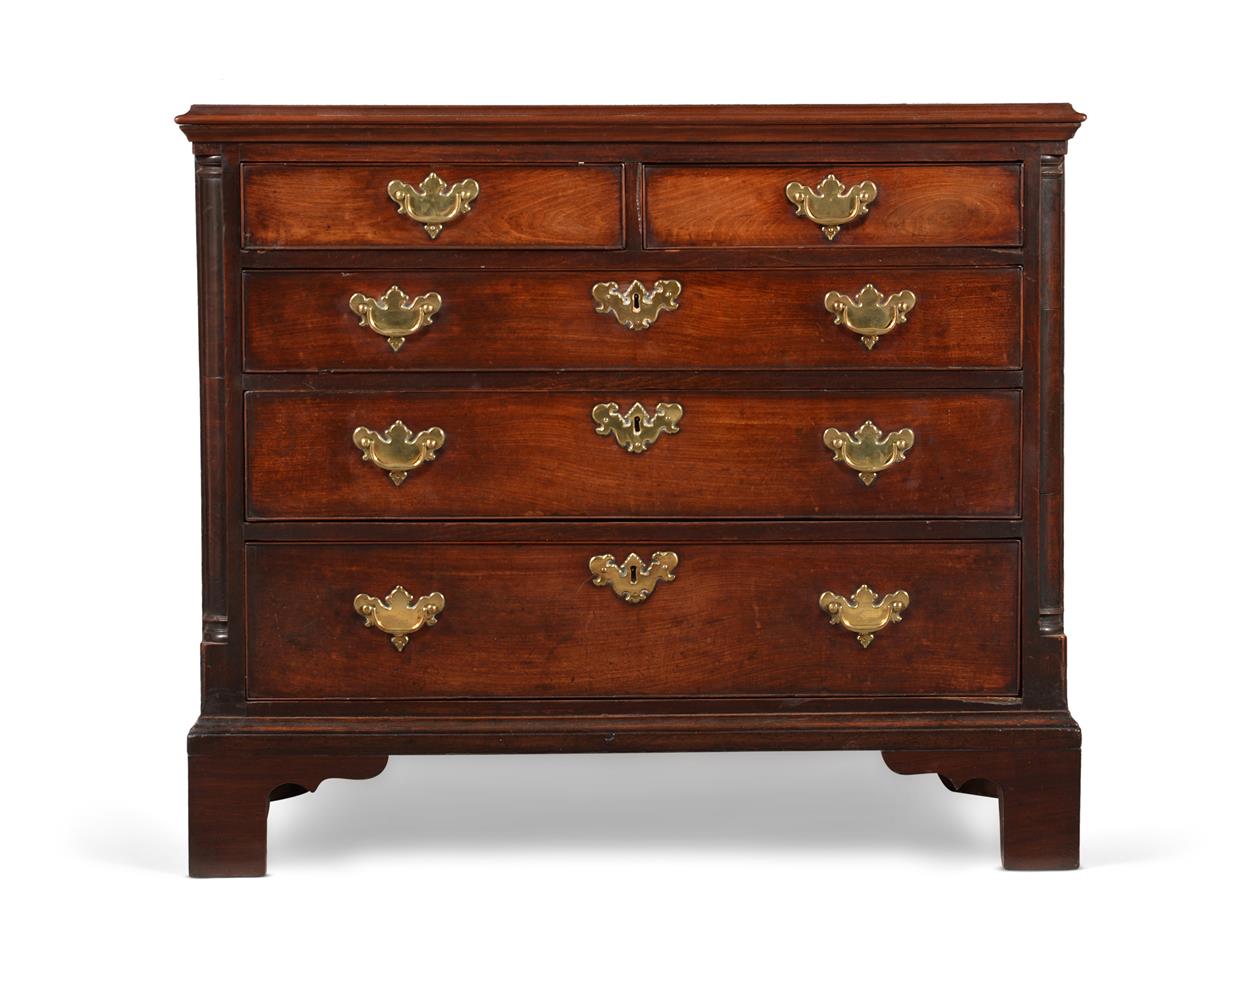 A GEORGE II MAHOGANY CHEST OF DRAWERS, PROBABLY NORTHERN ENGLAND, CIRCA 1750